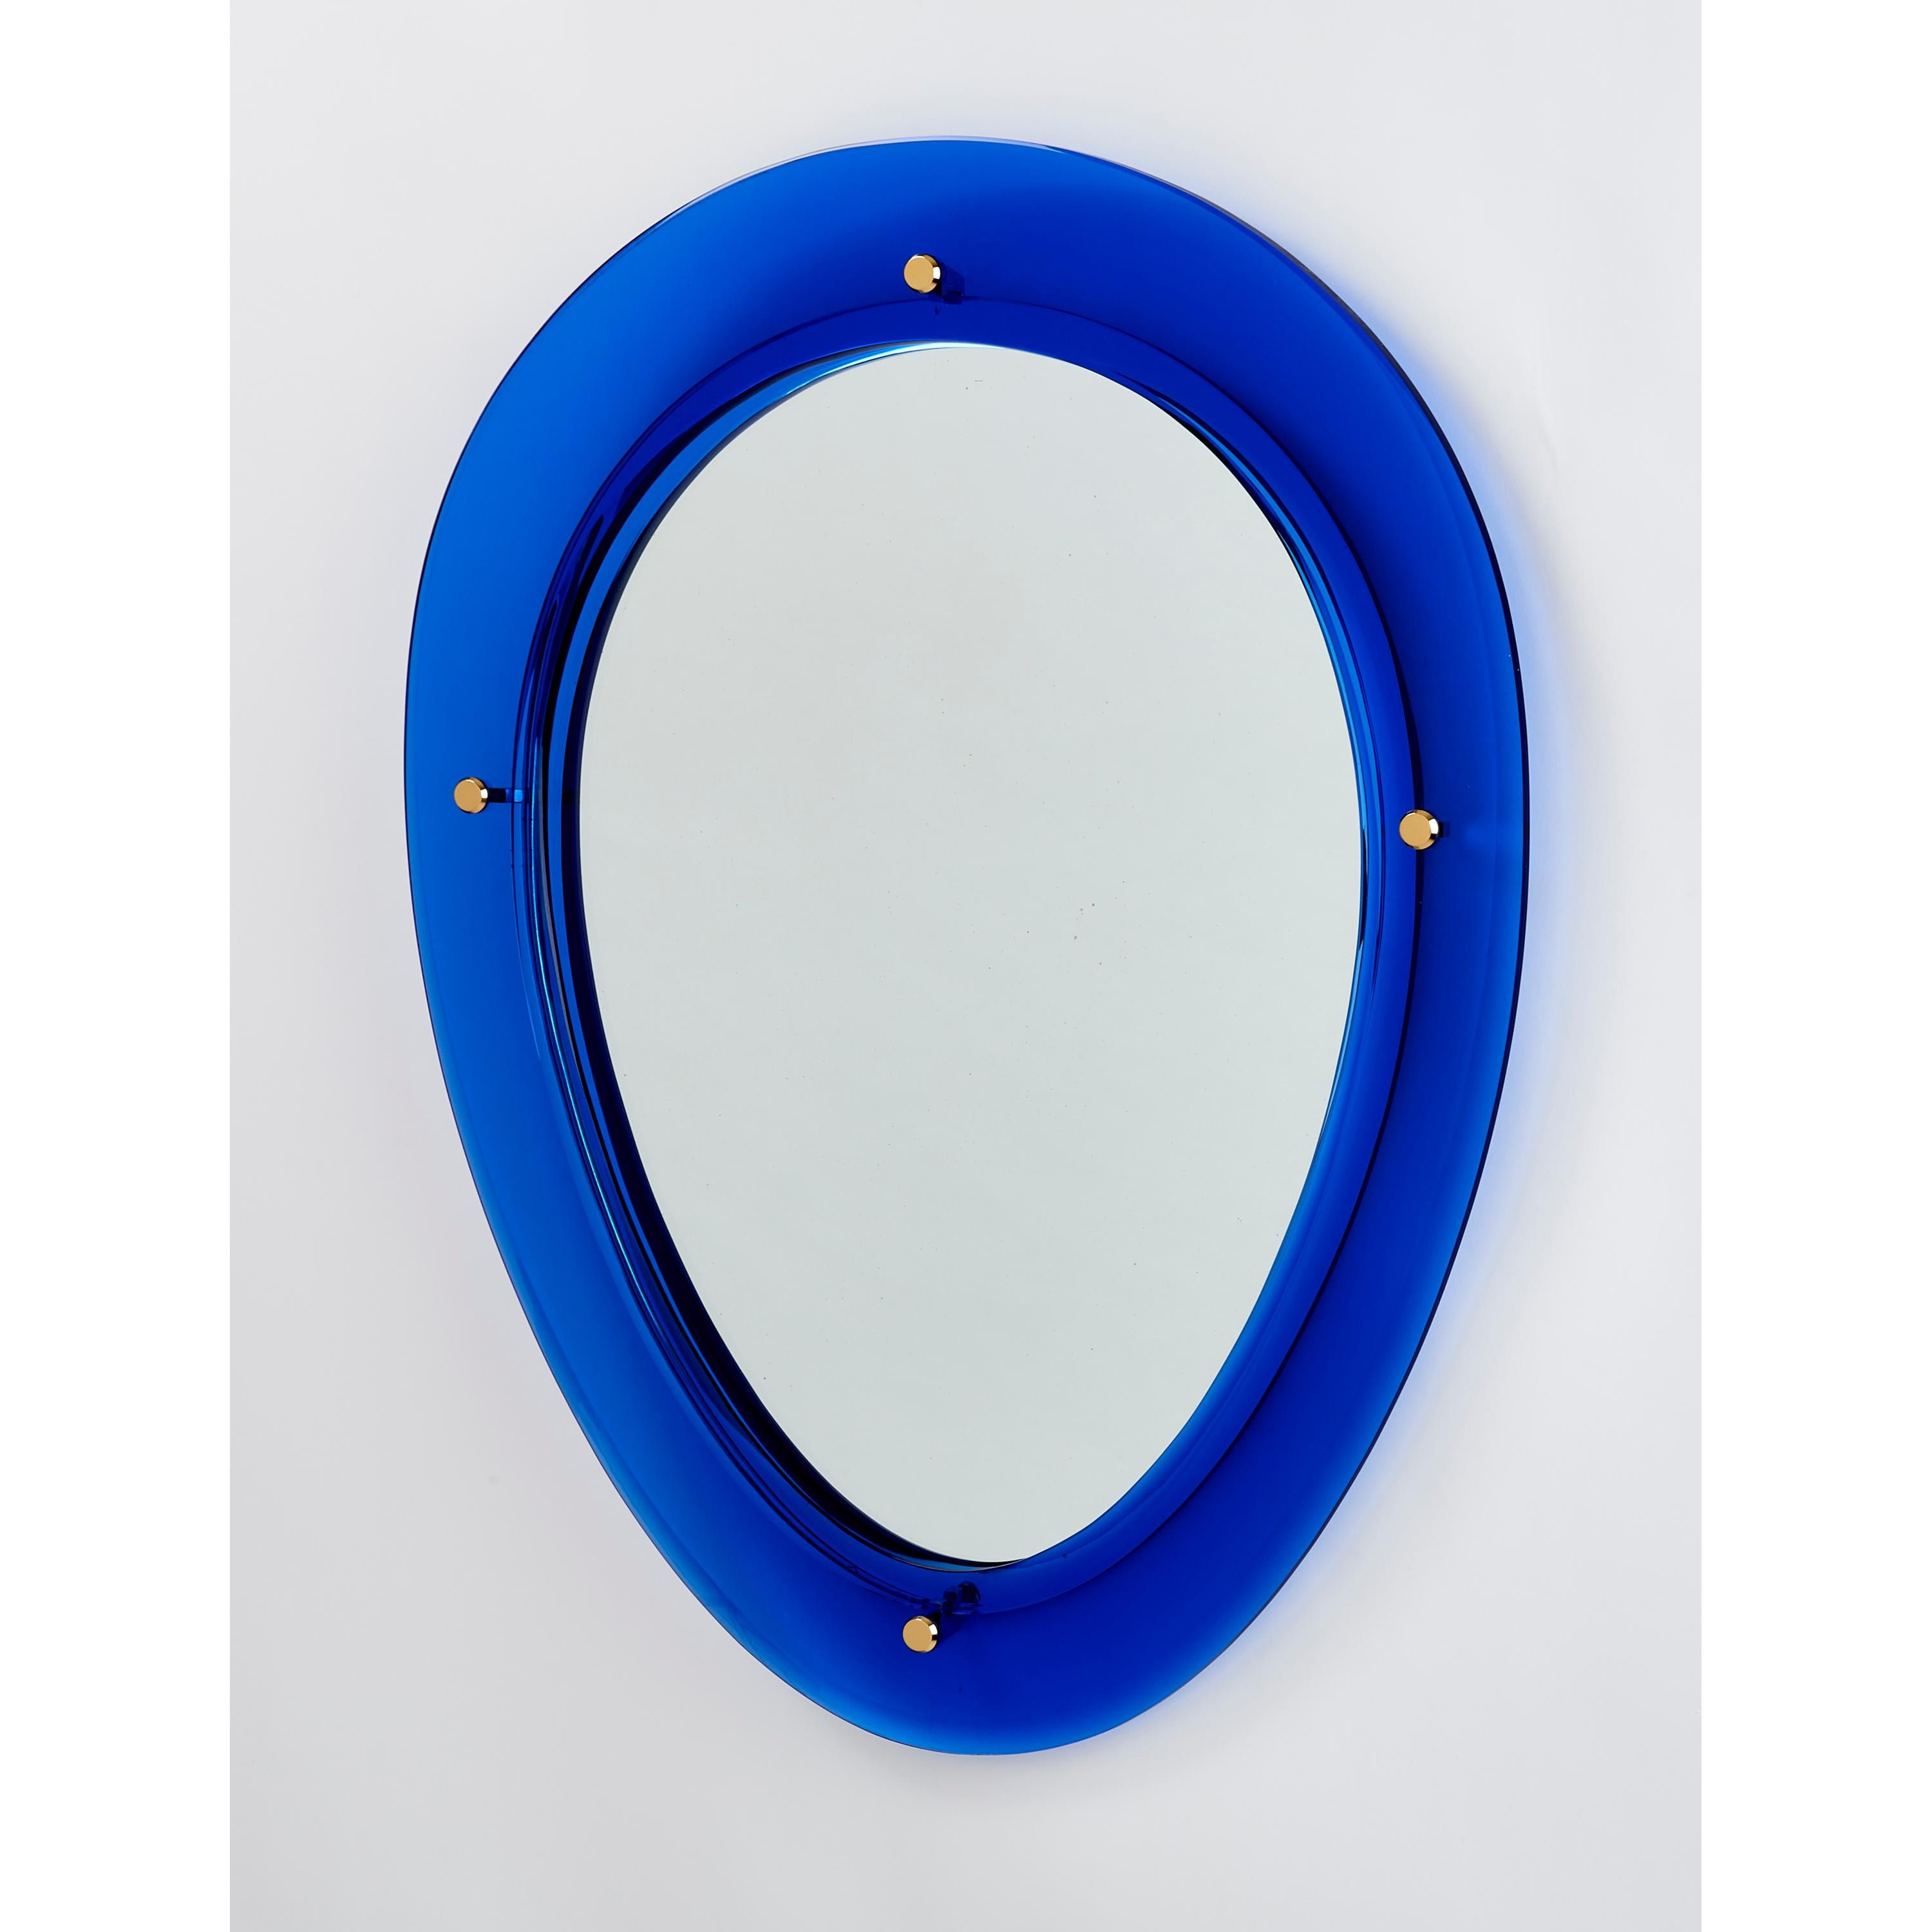 Pair of Blue Oval Shaped Glass Mirrors, Italy, 1960s For Sale 1